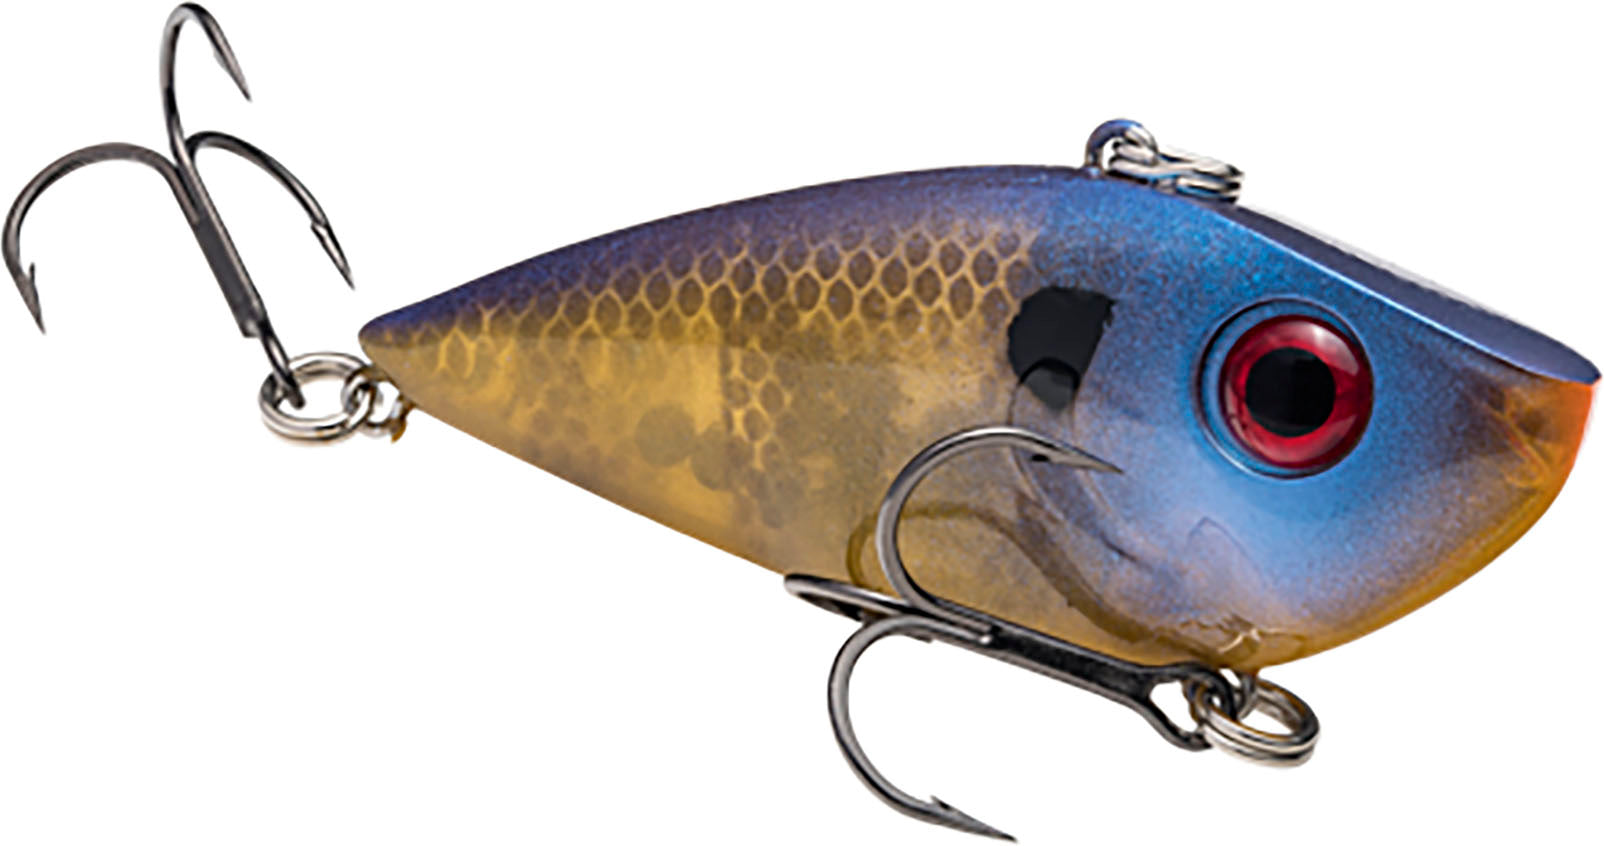 Strike King Red Eyed Shad Lipless Crankbait - 2.25 Inch — Discount Tackle